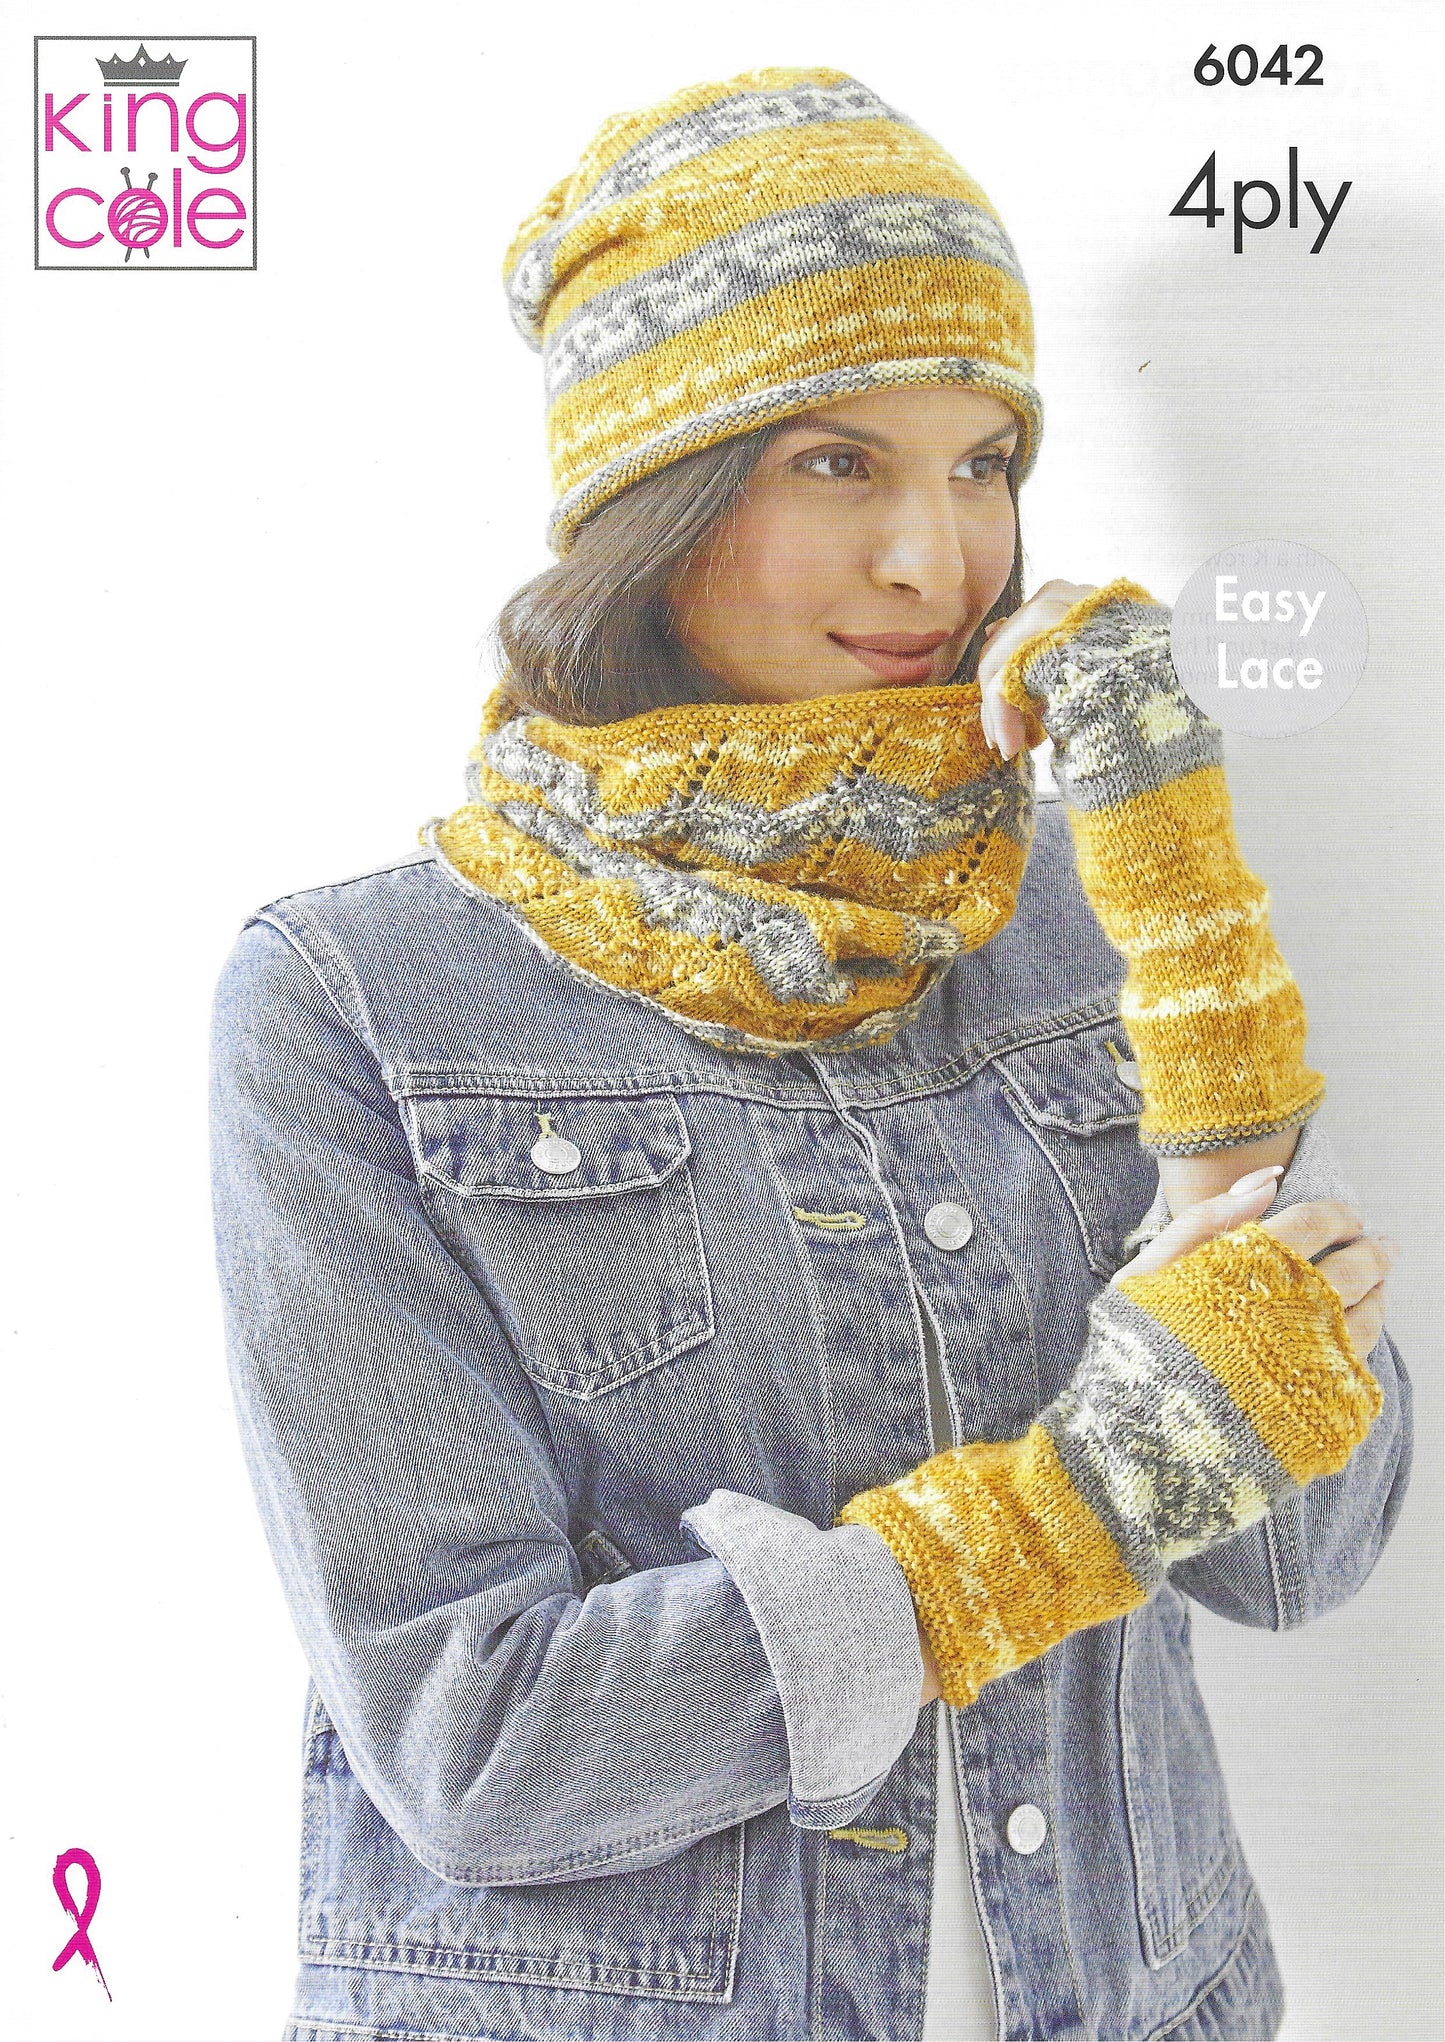 King Cole Pattern 6042 - Hat, Cowl, Scarf and Mitts